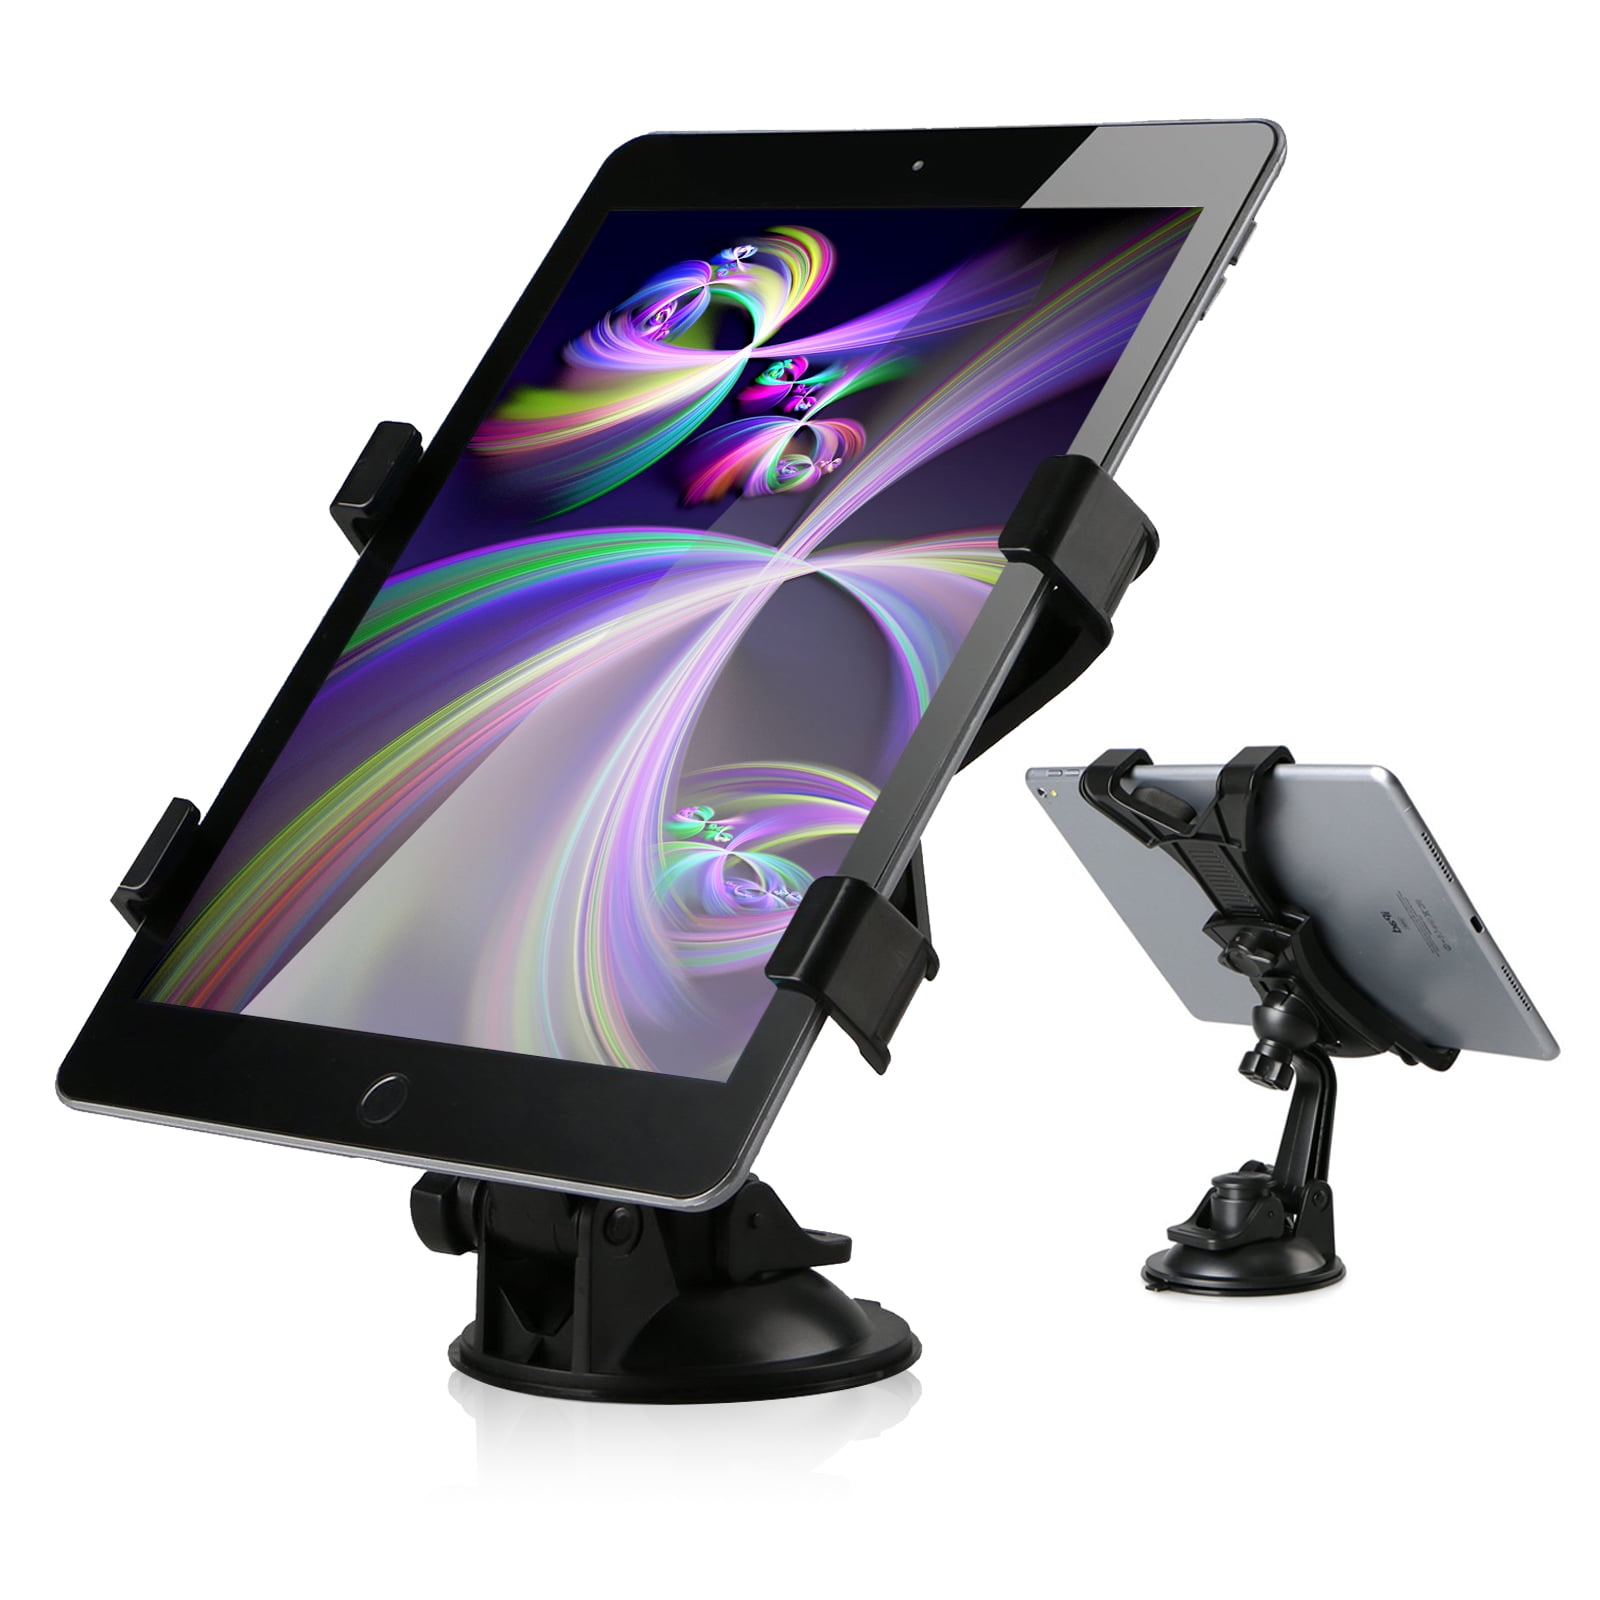 360° car windshield mount holder for 7-11" iPad Mini/2/3/4/Air iPhone tablet S* 